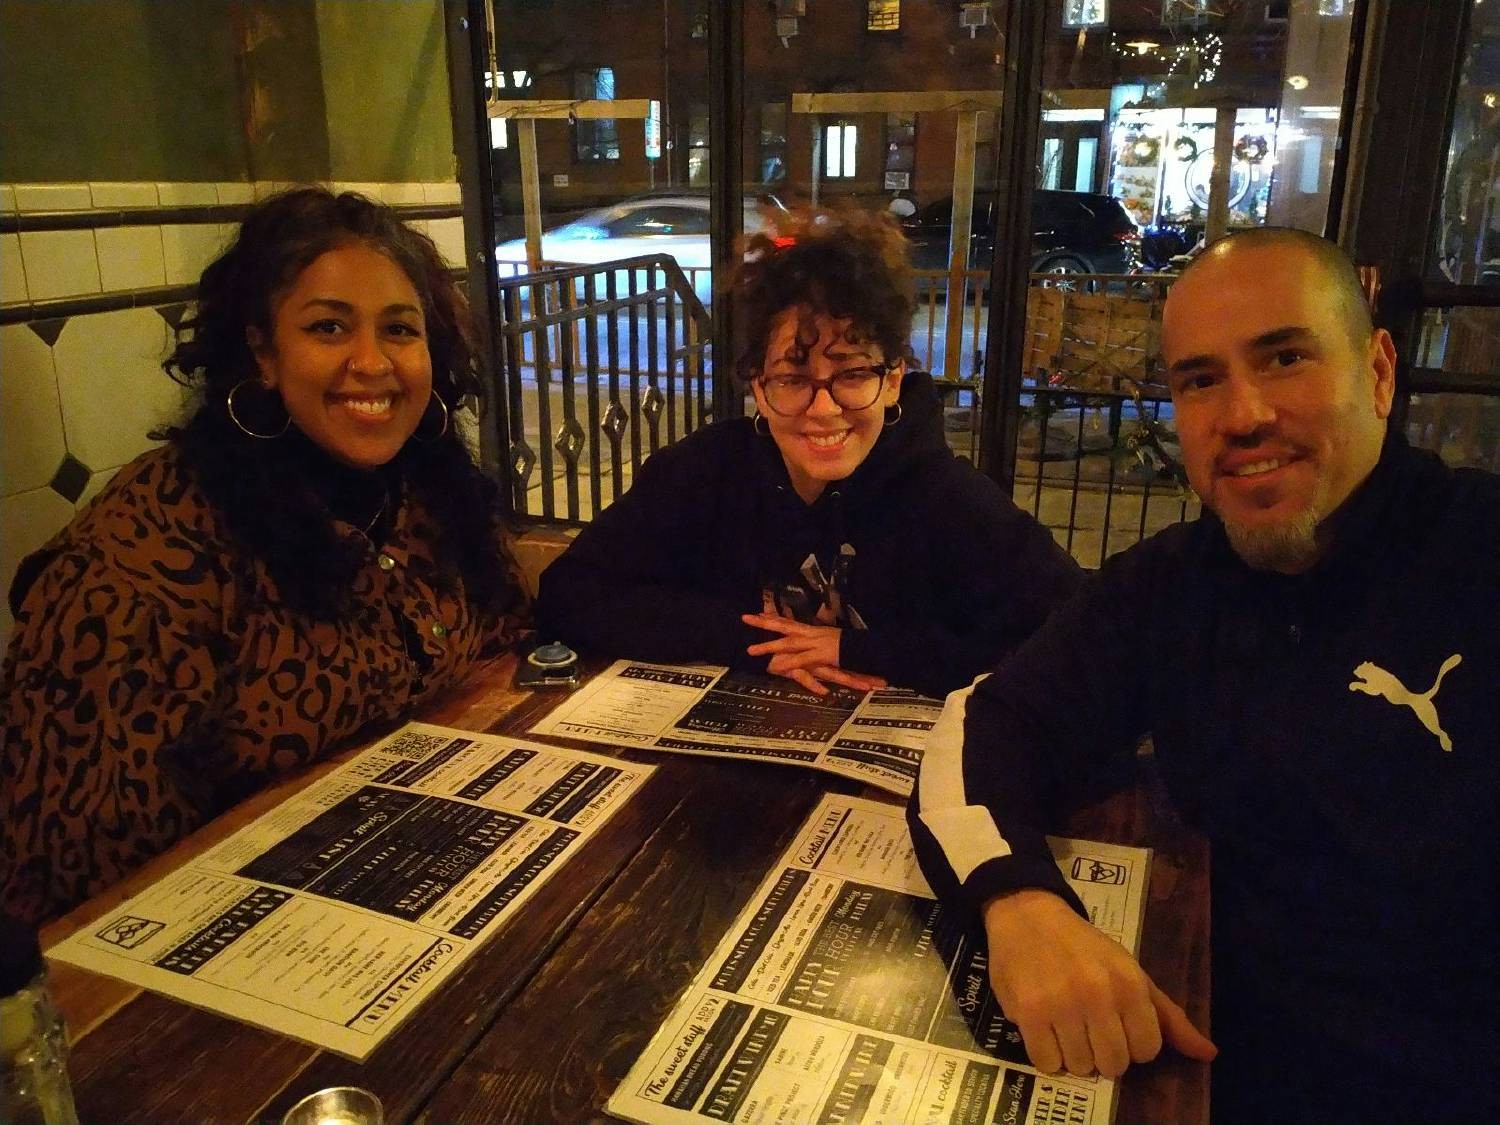 Some of the Email Operations team, Shanis, Melissa, and Dan enjoying a holiday happy hour.